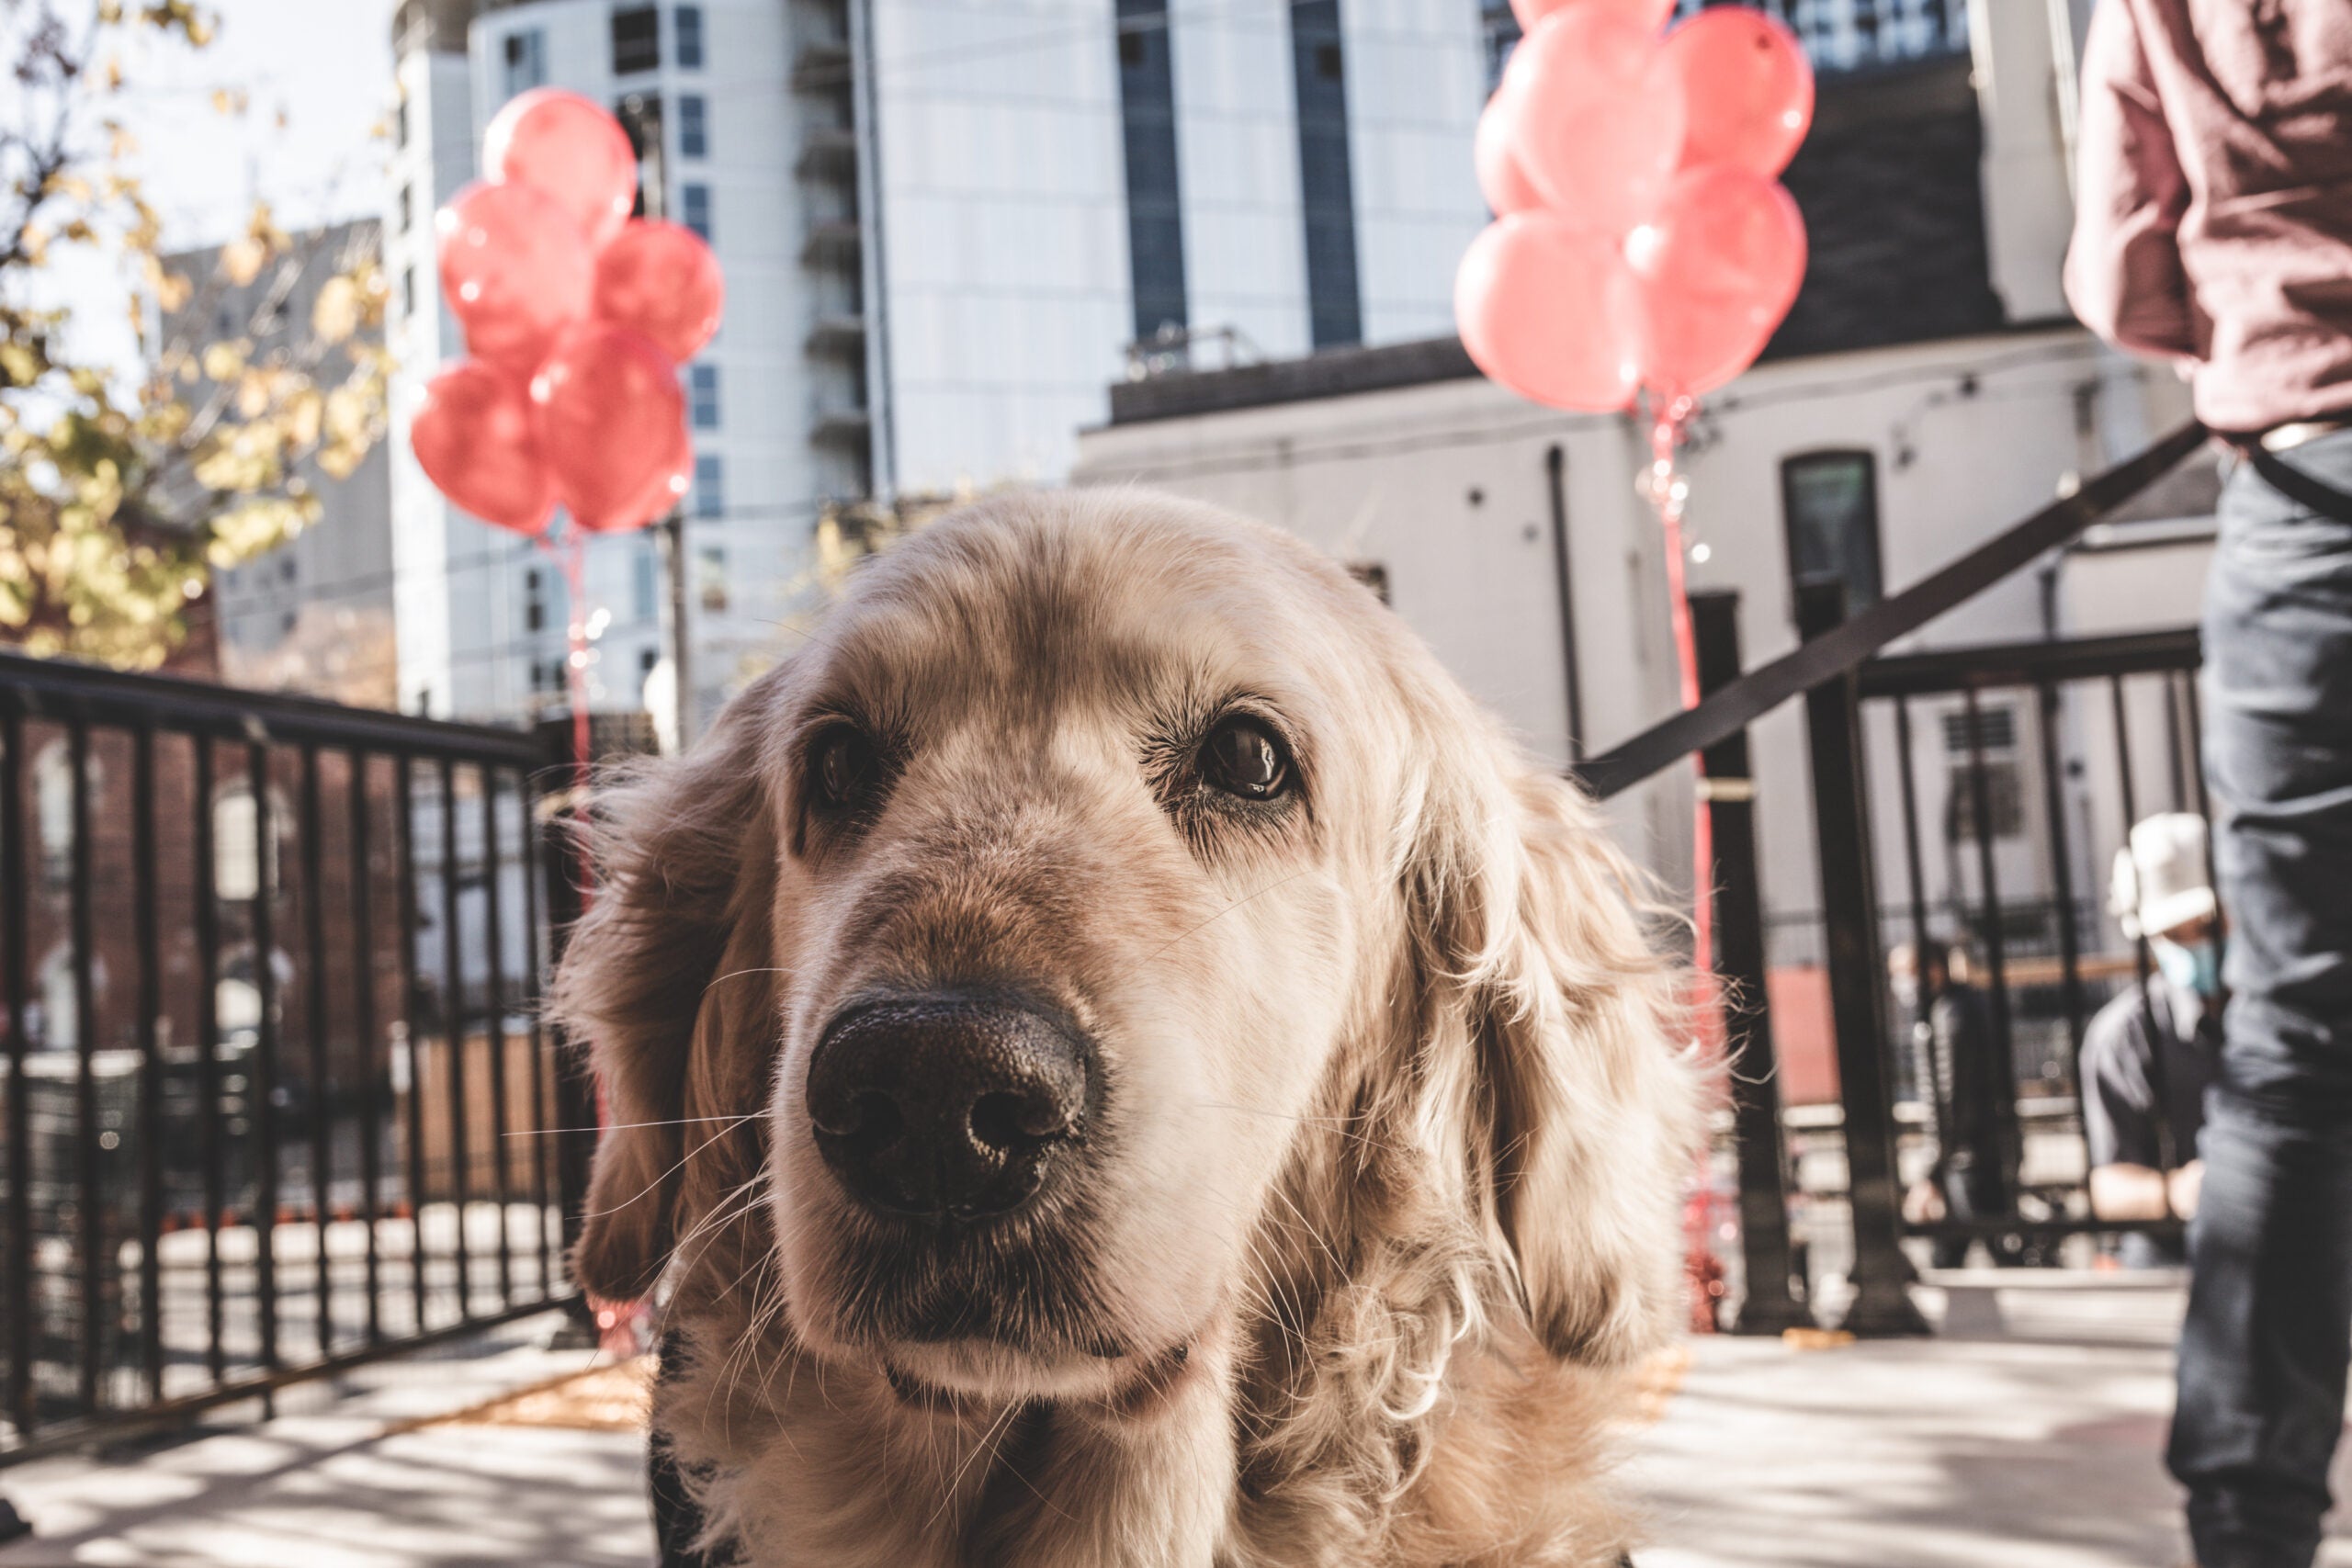 How one dog inspired a whole organization